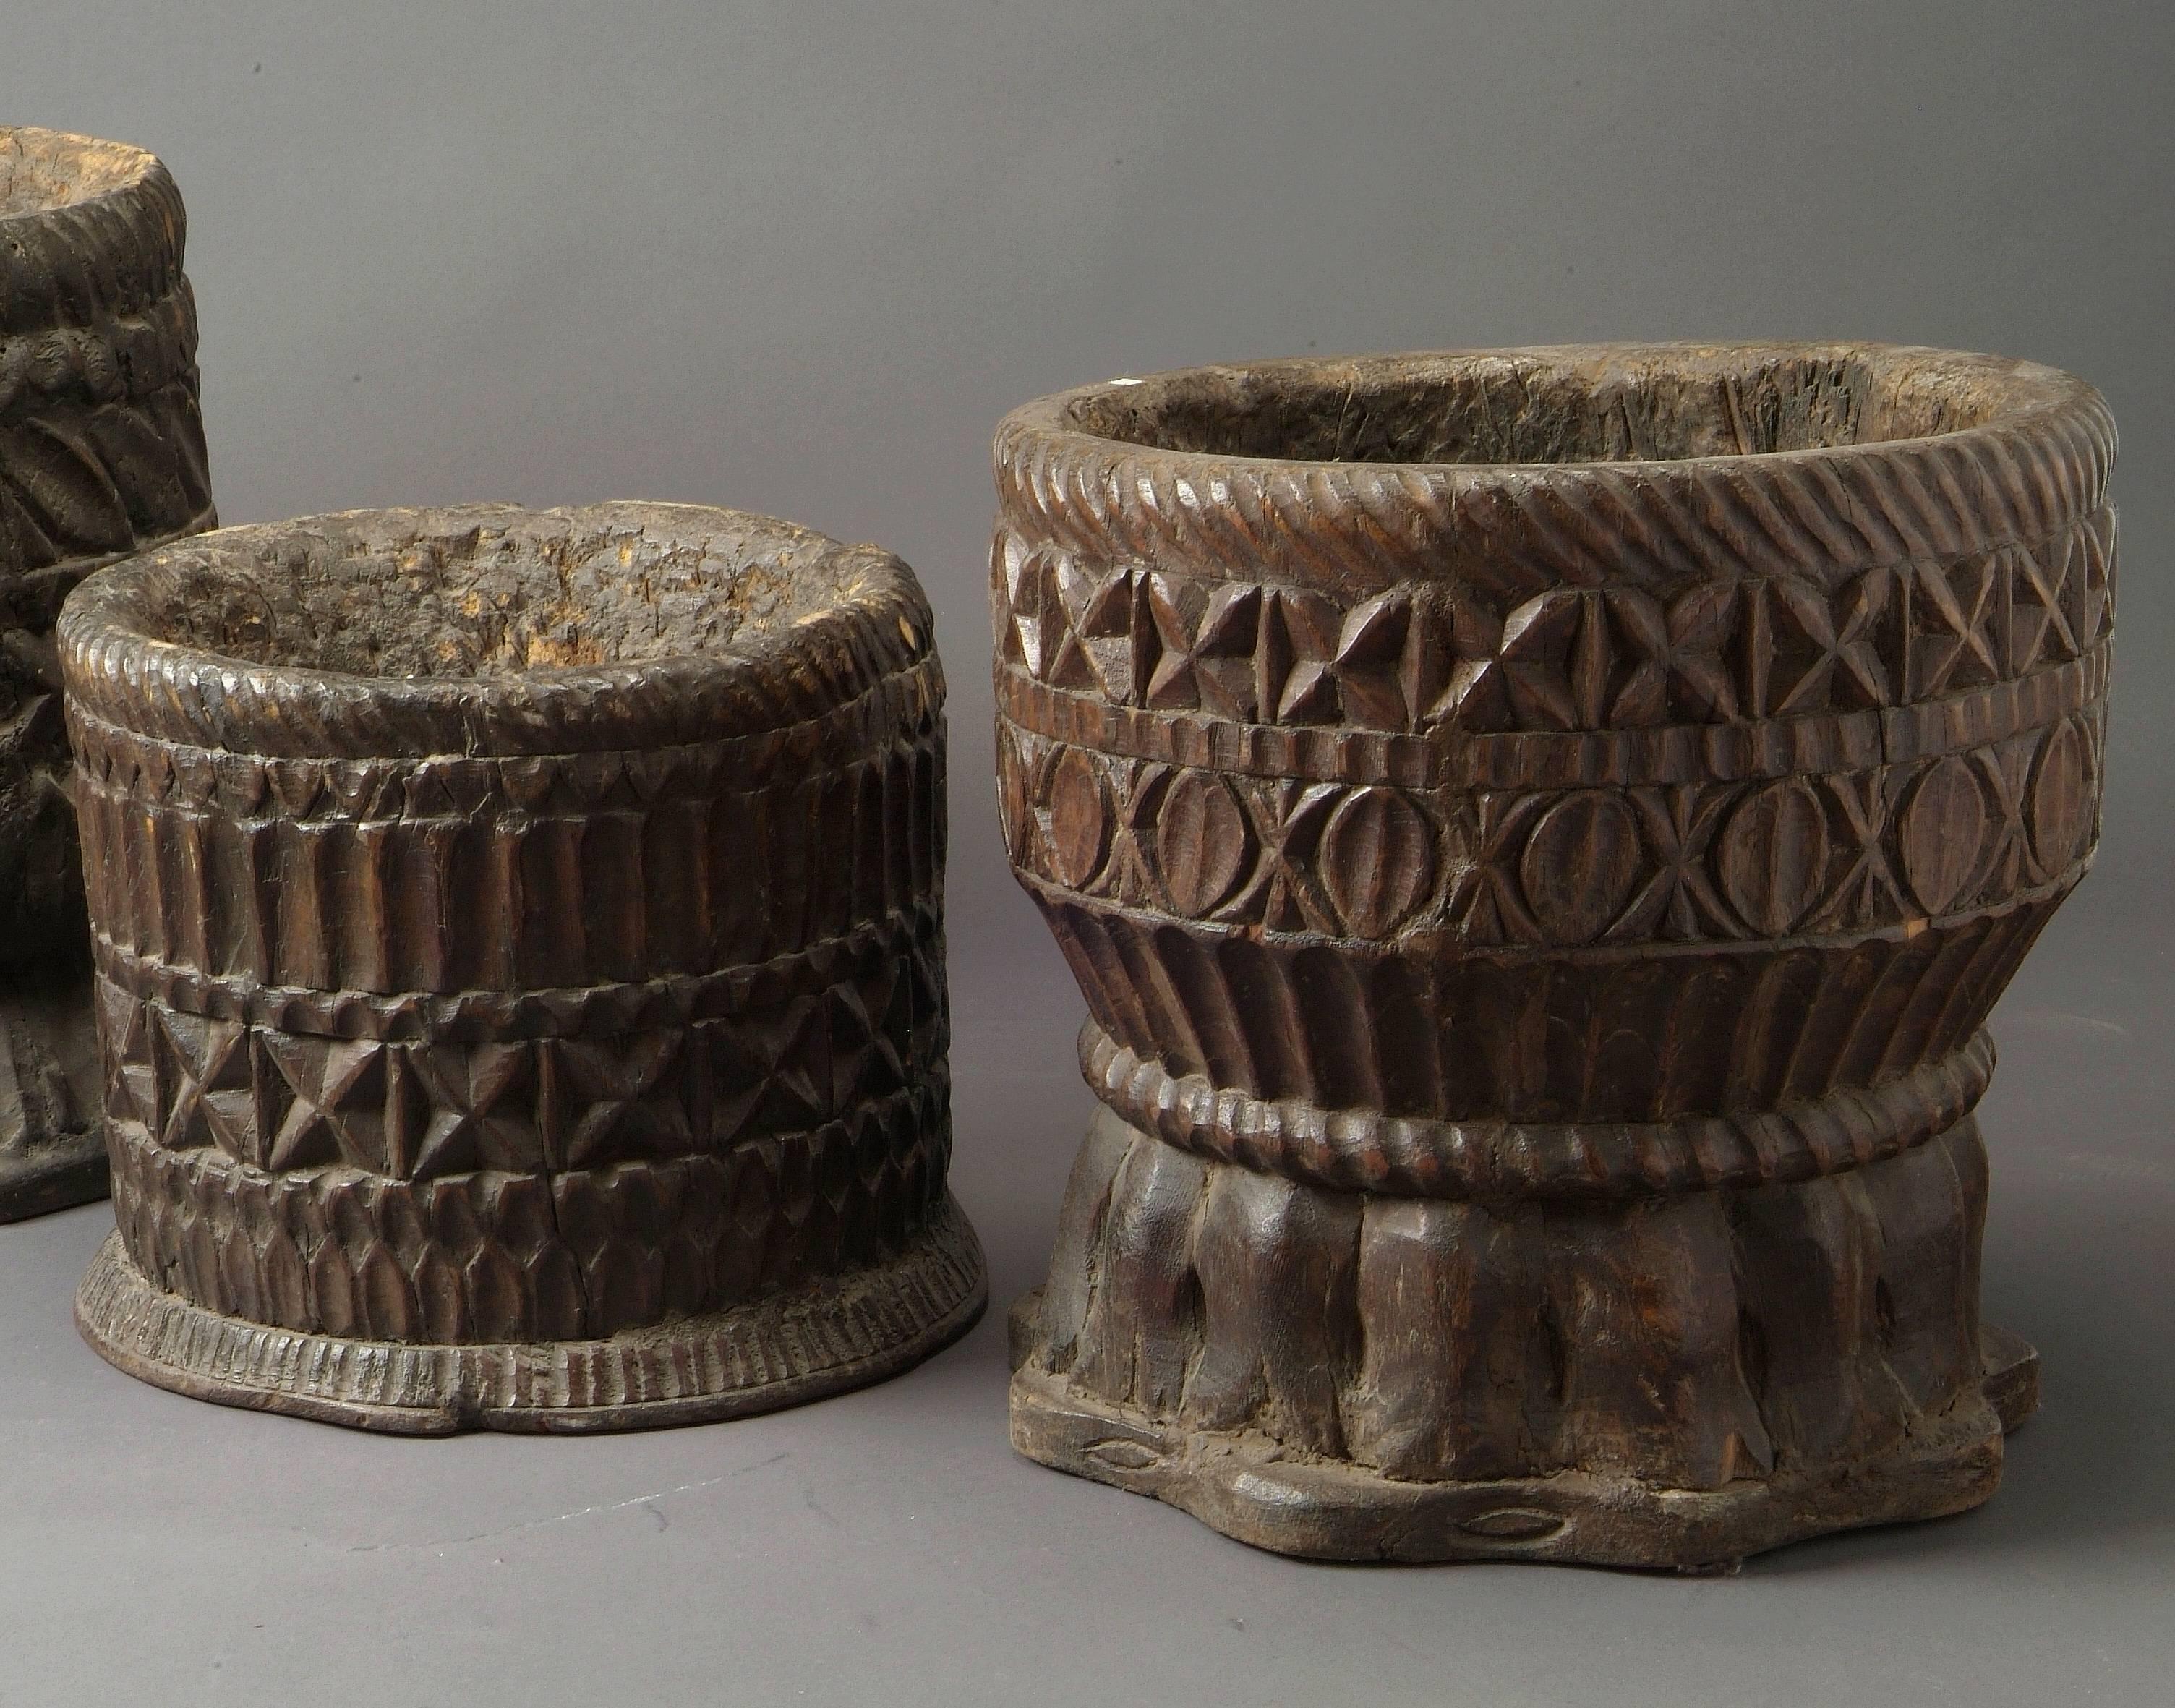 Three very rare wooden mortars carved in the form of elephant feet - India, Gujarat, late 18th century 
Dimensions: from left to right Ø.36 X H 43 - Ø.39 X H 28 - Ø.39 X H 38 cm.